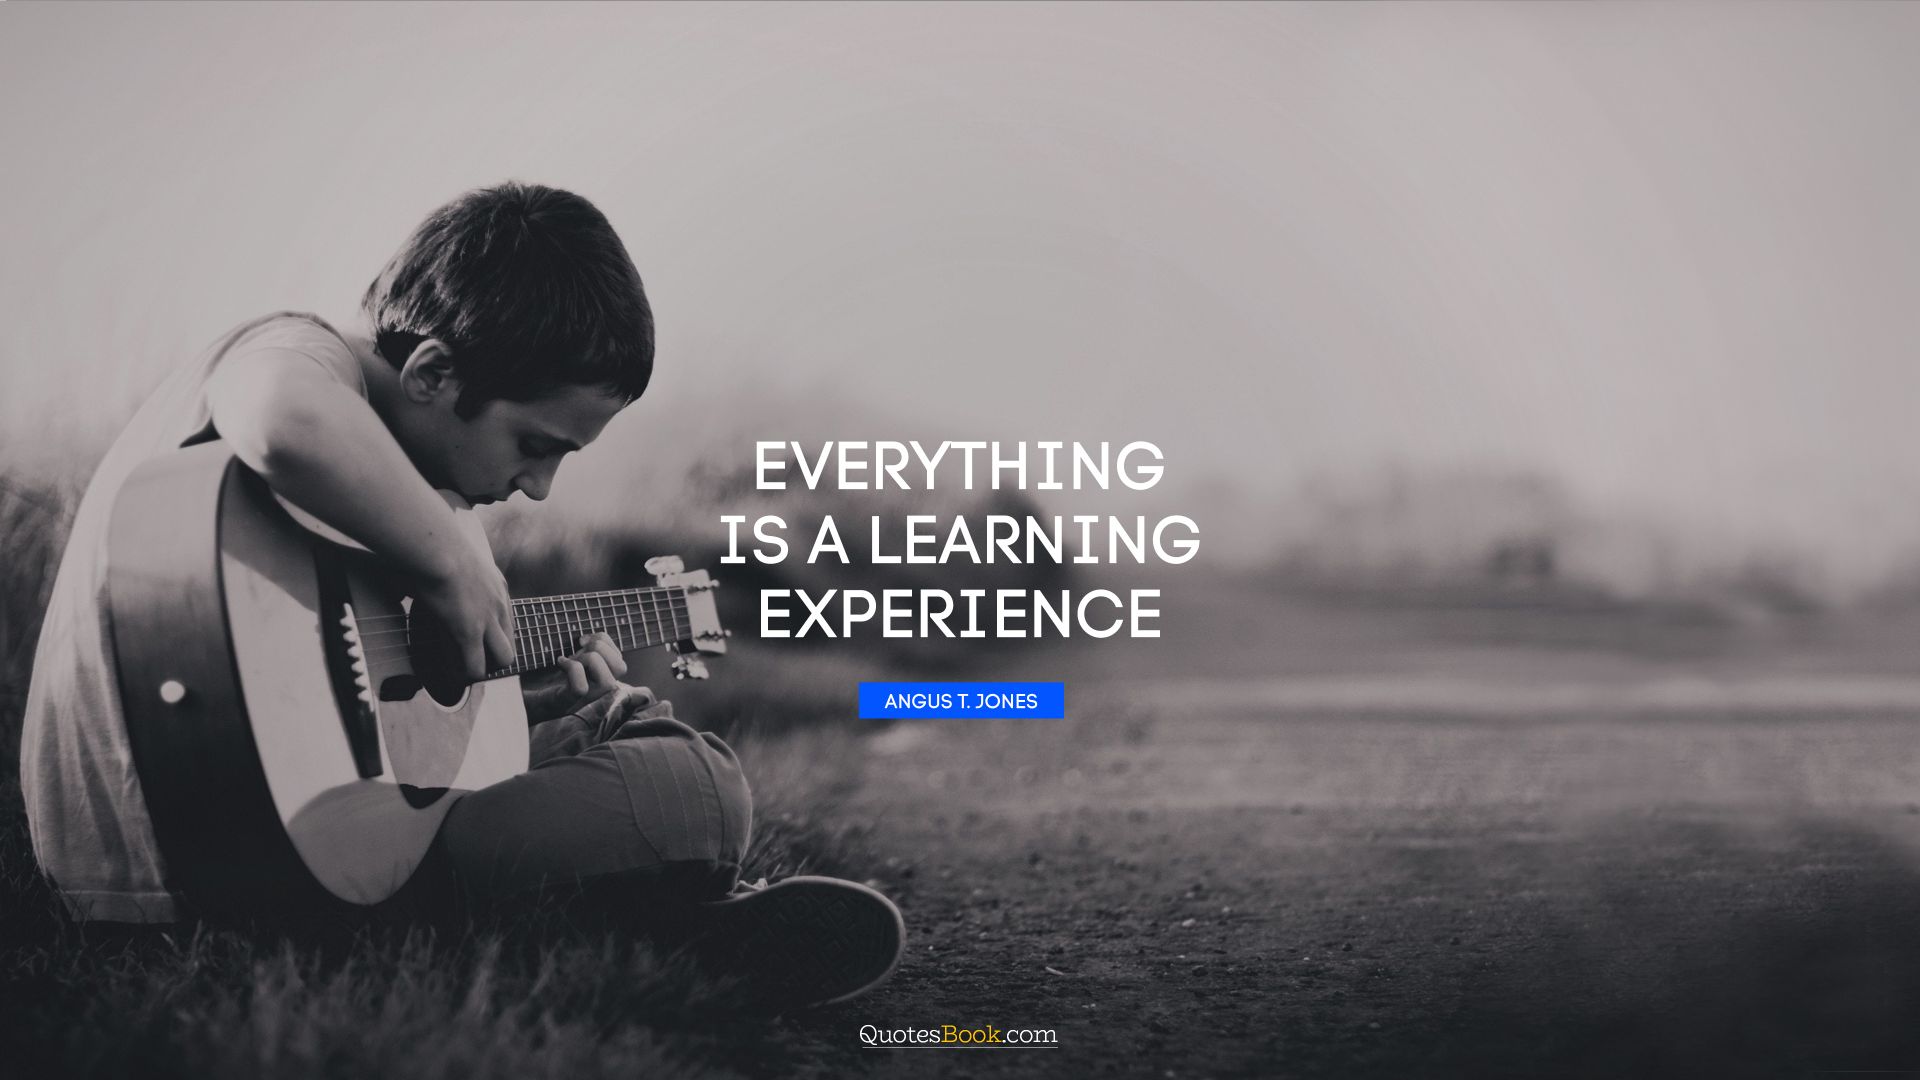 Everything is a learning experience. - Quote by Angus T. Jones